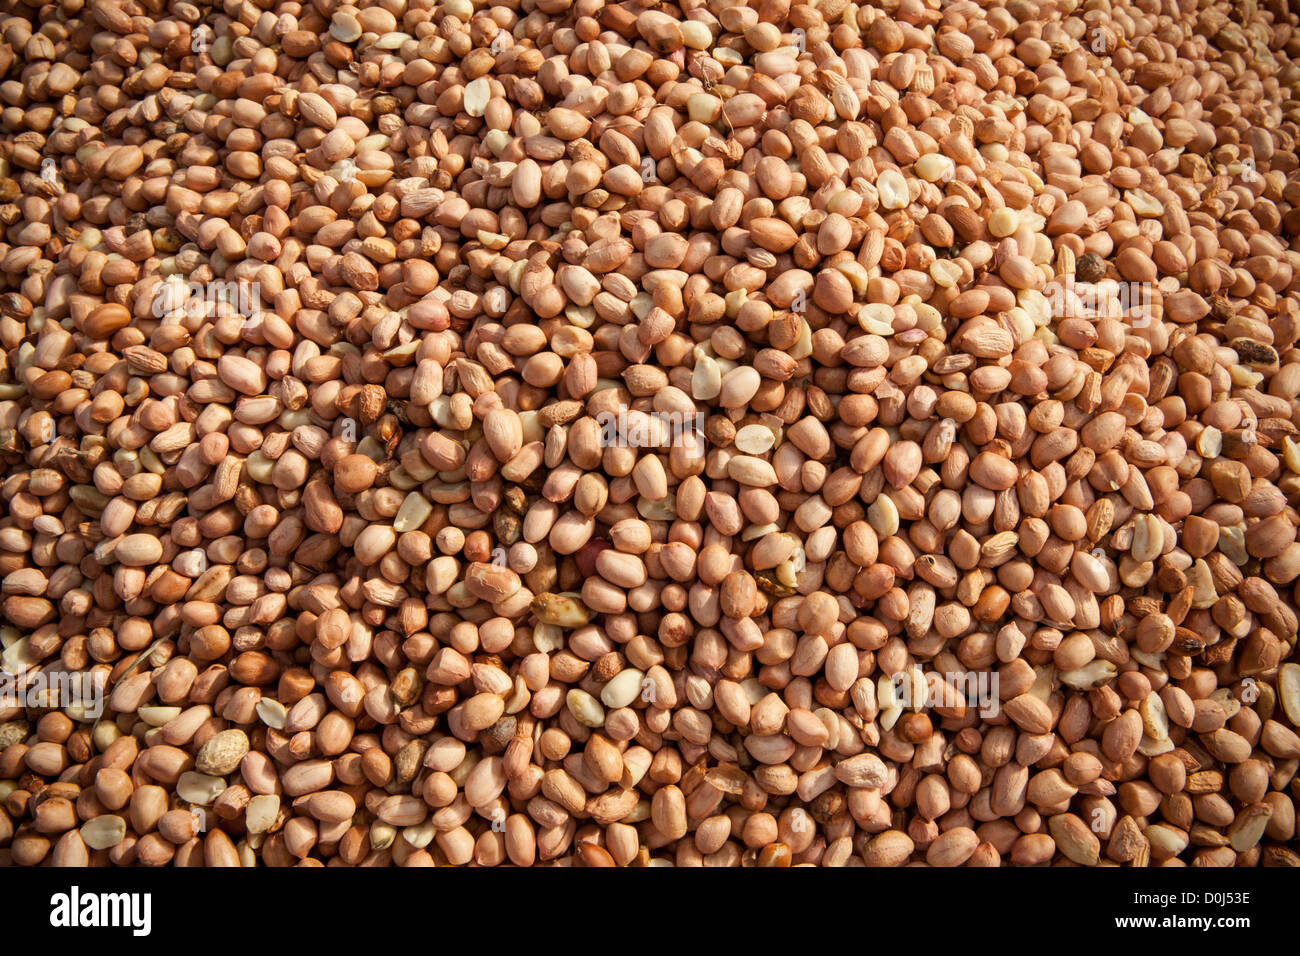 Peanuts are ready for packaging at a commodities warehouse in Dar es Salaam, Tanzania, East Africa. Stock Photo